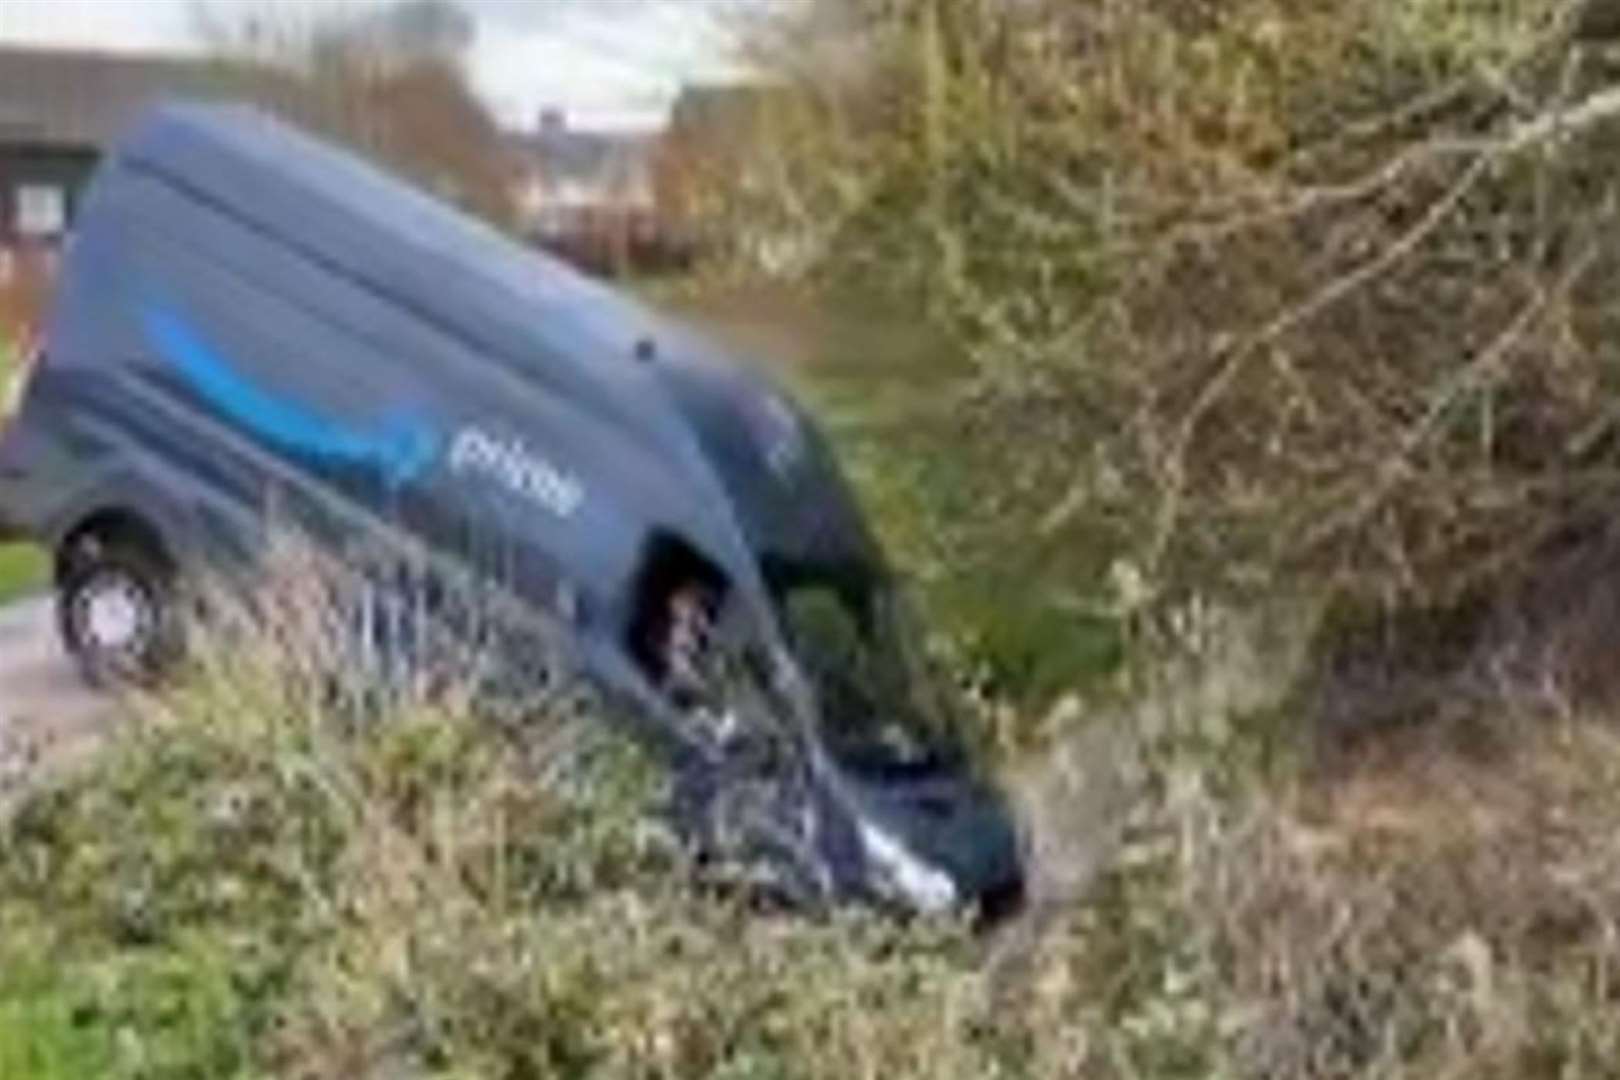 The delivery van is stuck in a ditch in Ashford. Picture: James Hazeldon